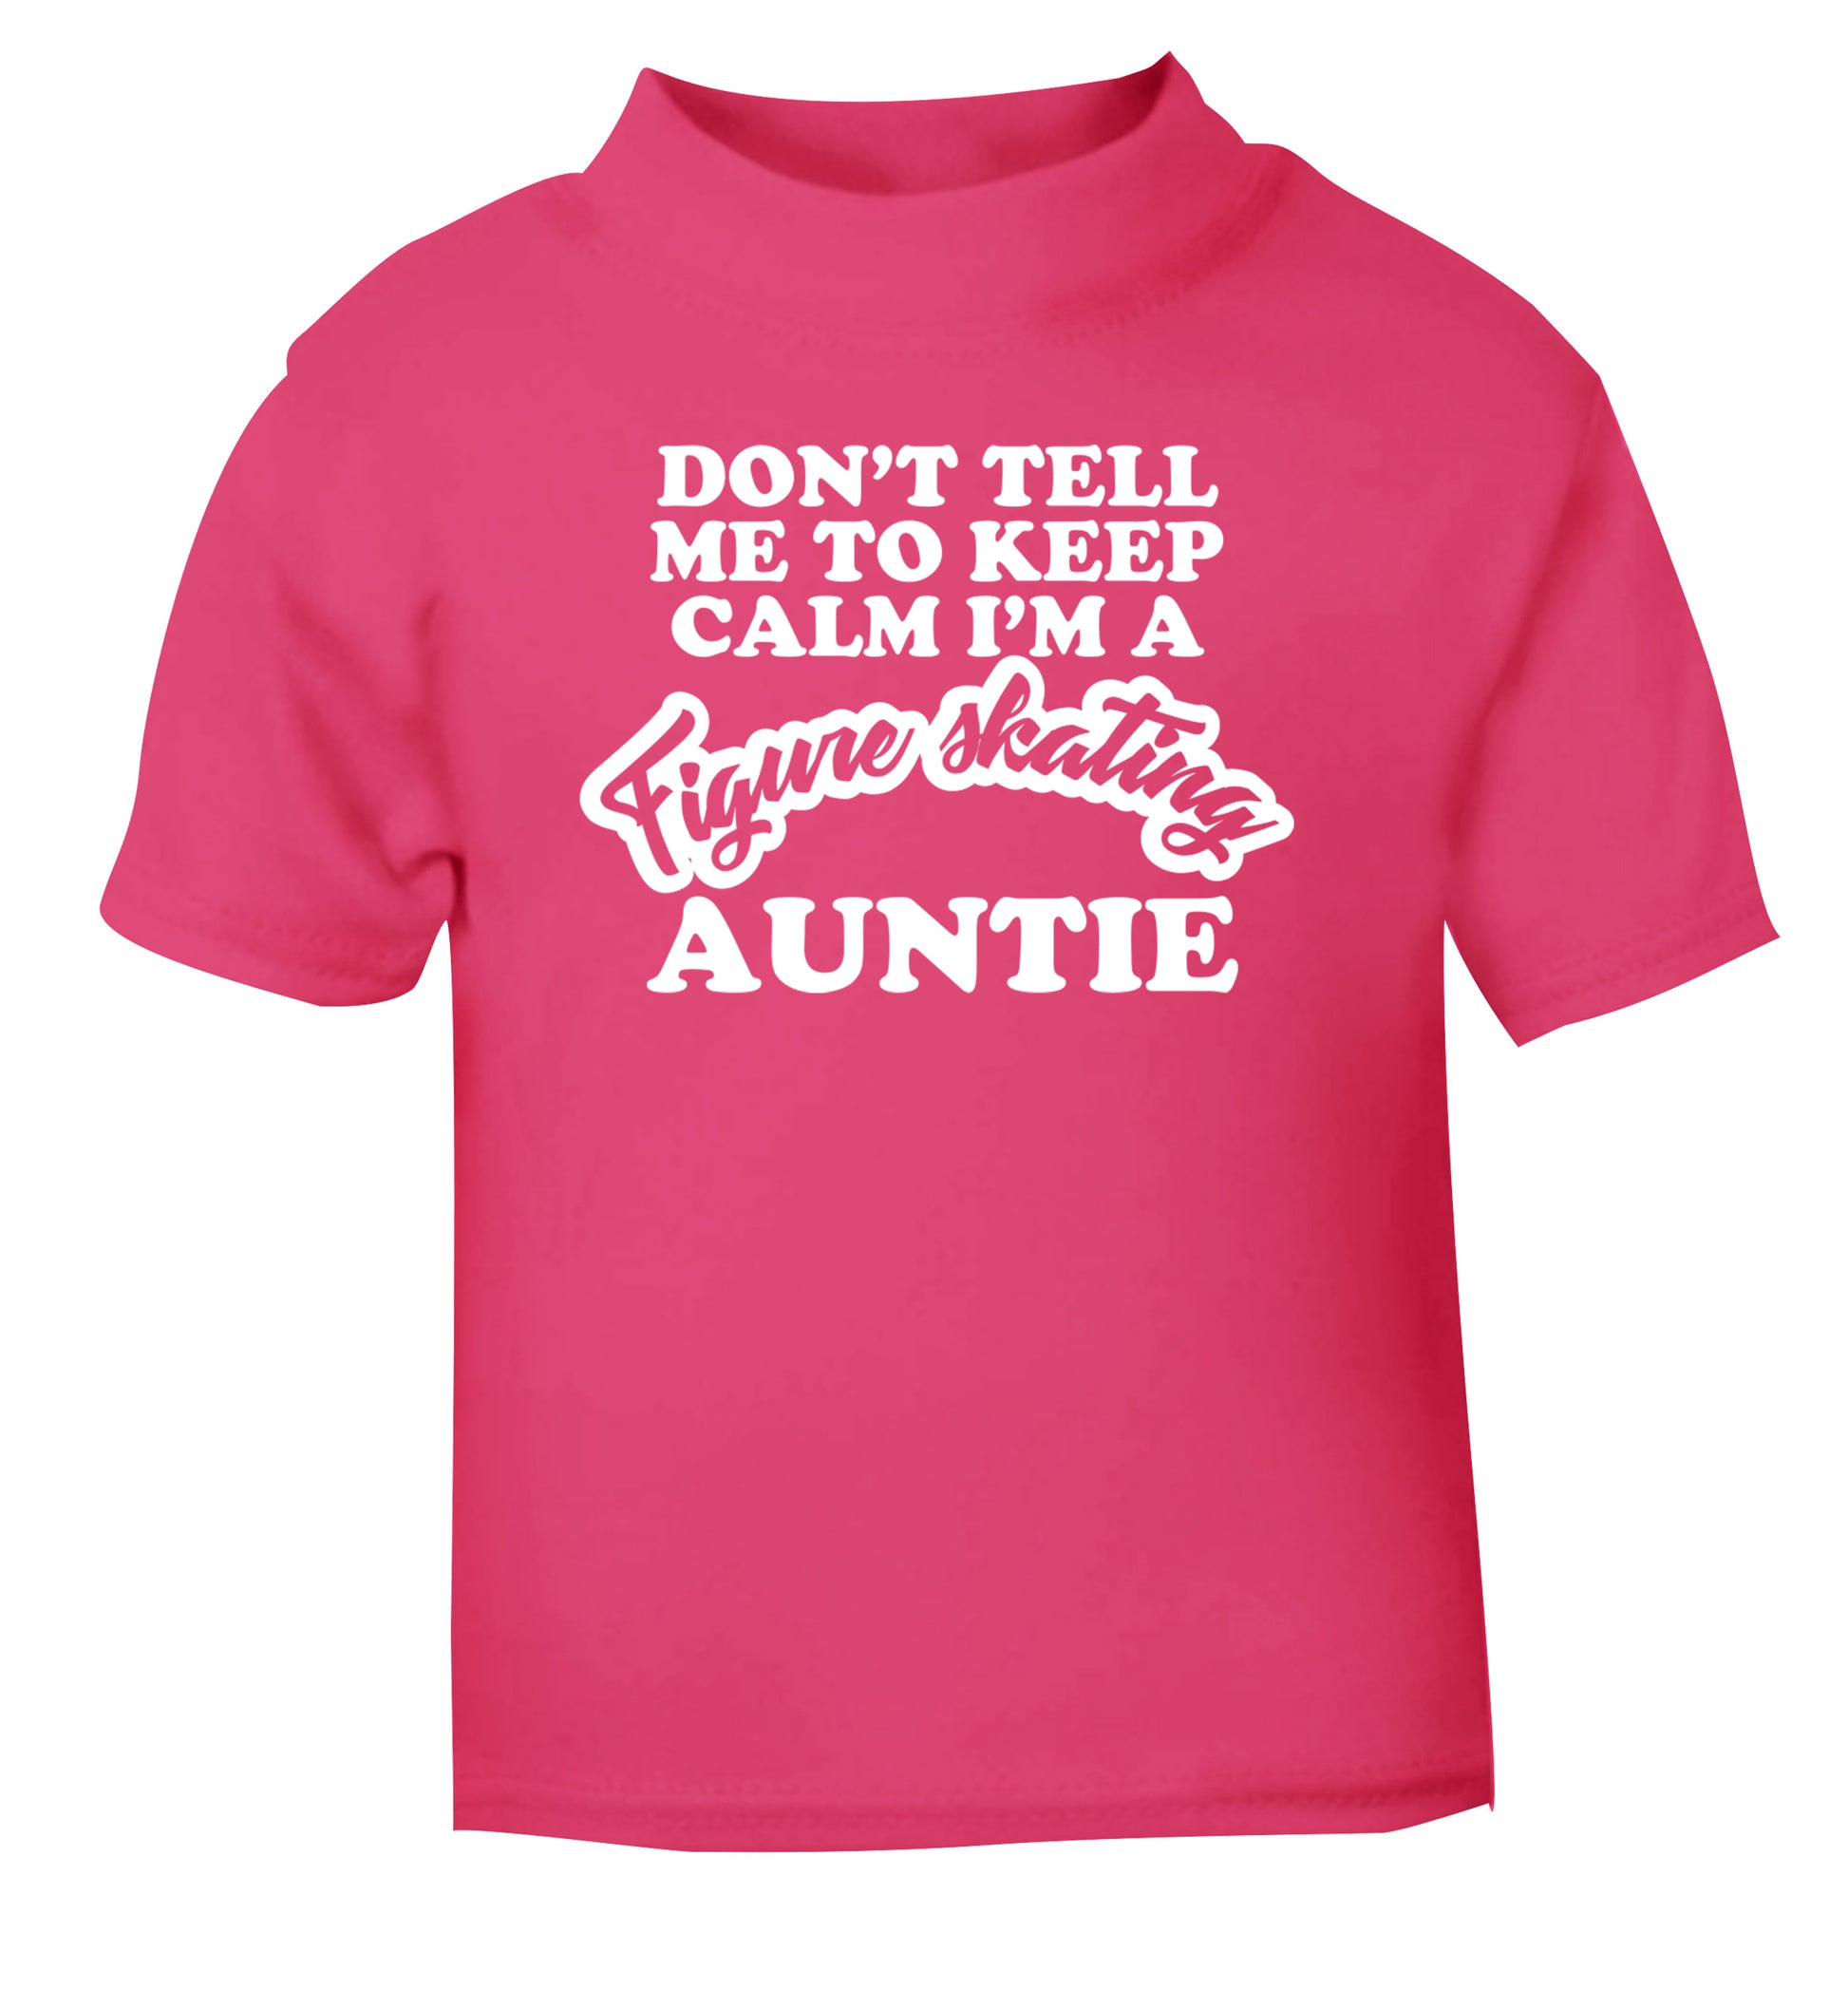 Don't tell me to keep calm I'm a figure skating auntie pink Baby Toddler Tshirt 2 Years